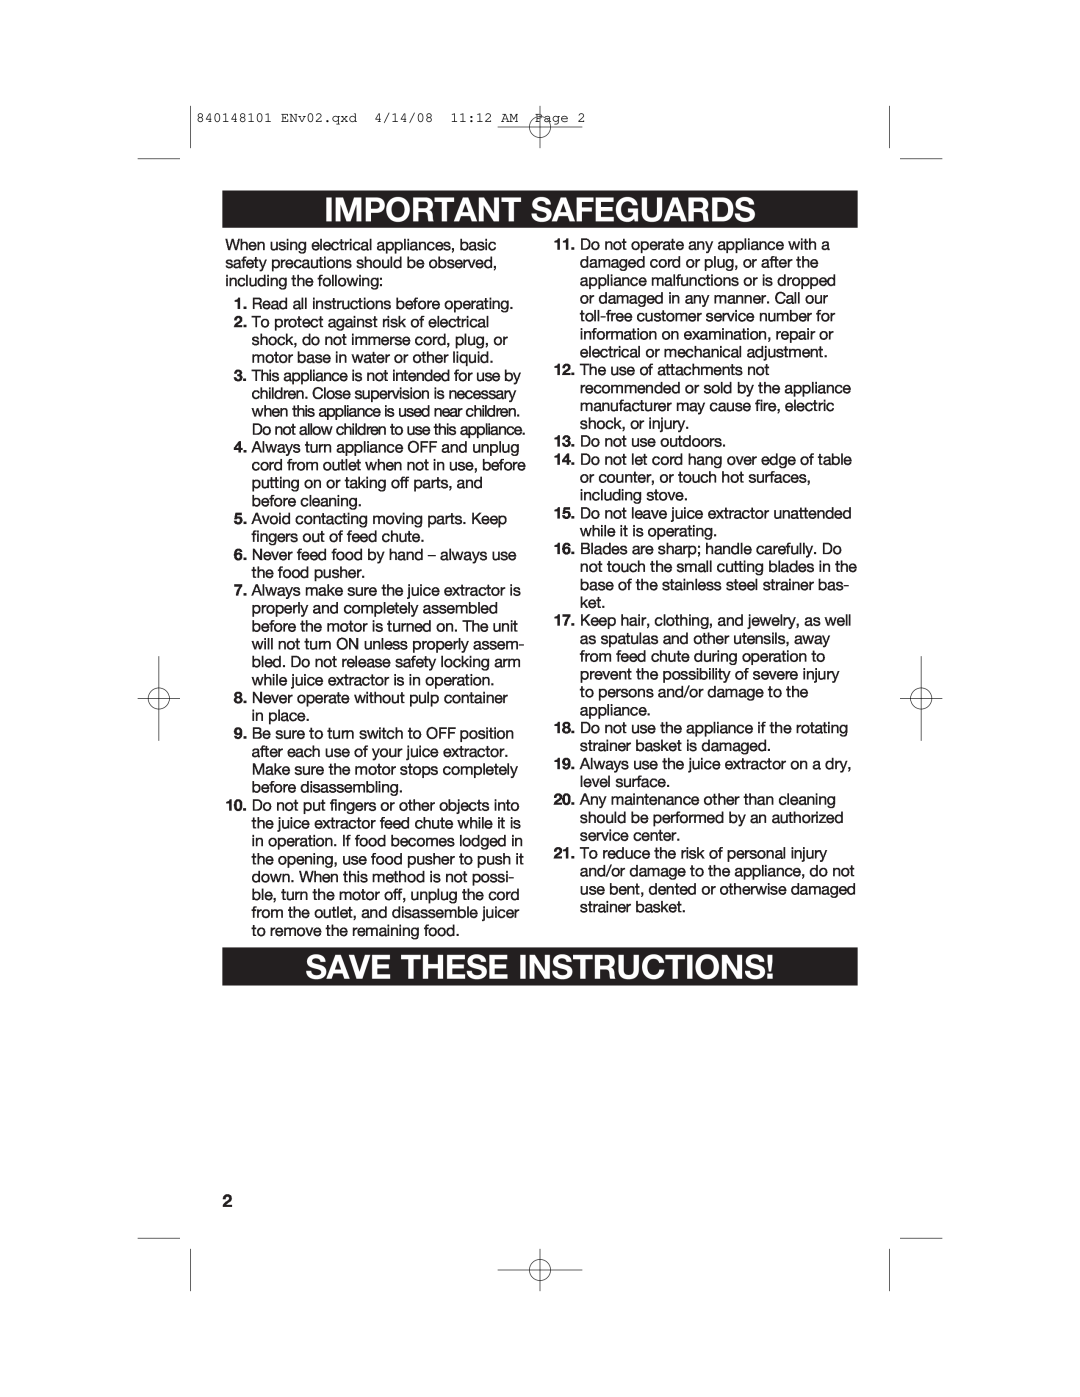 Hamilton Beach 840148101 manual Important Safeguards, Save These Instructions 